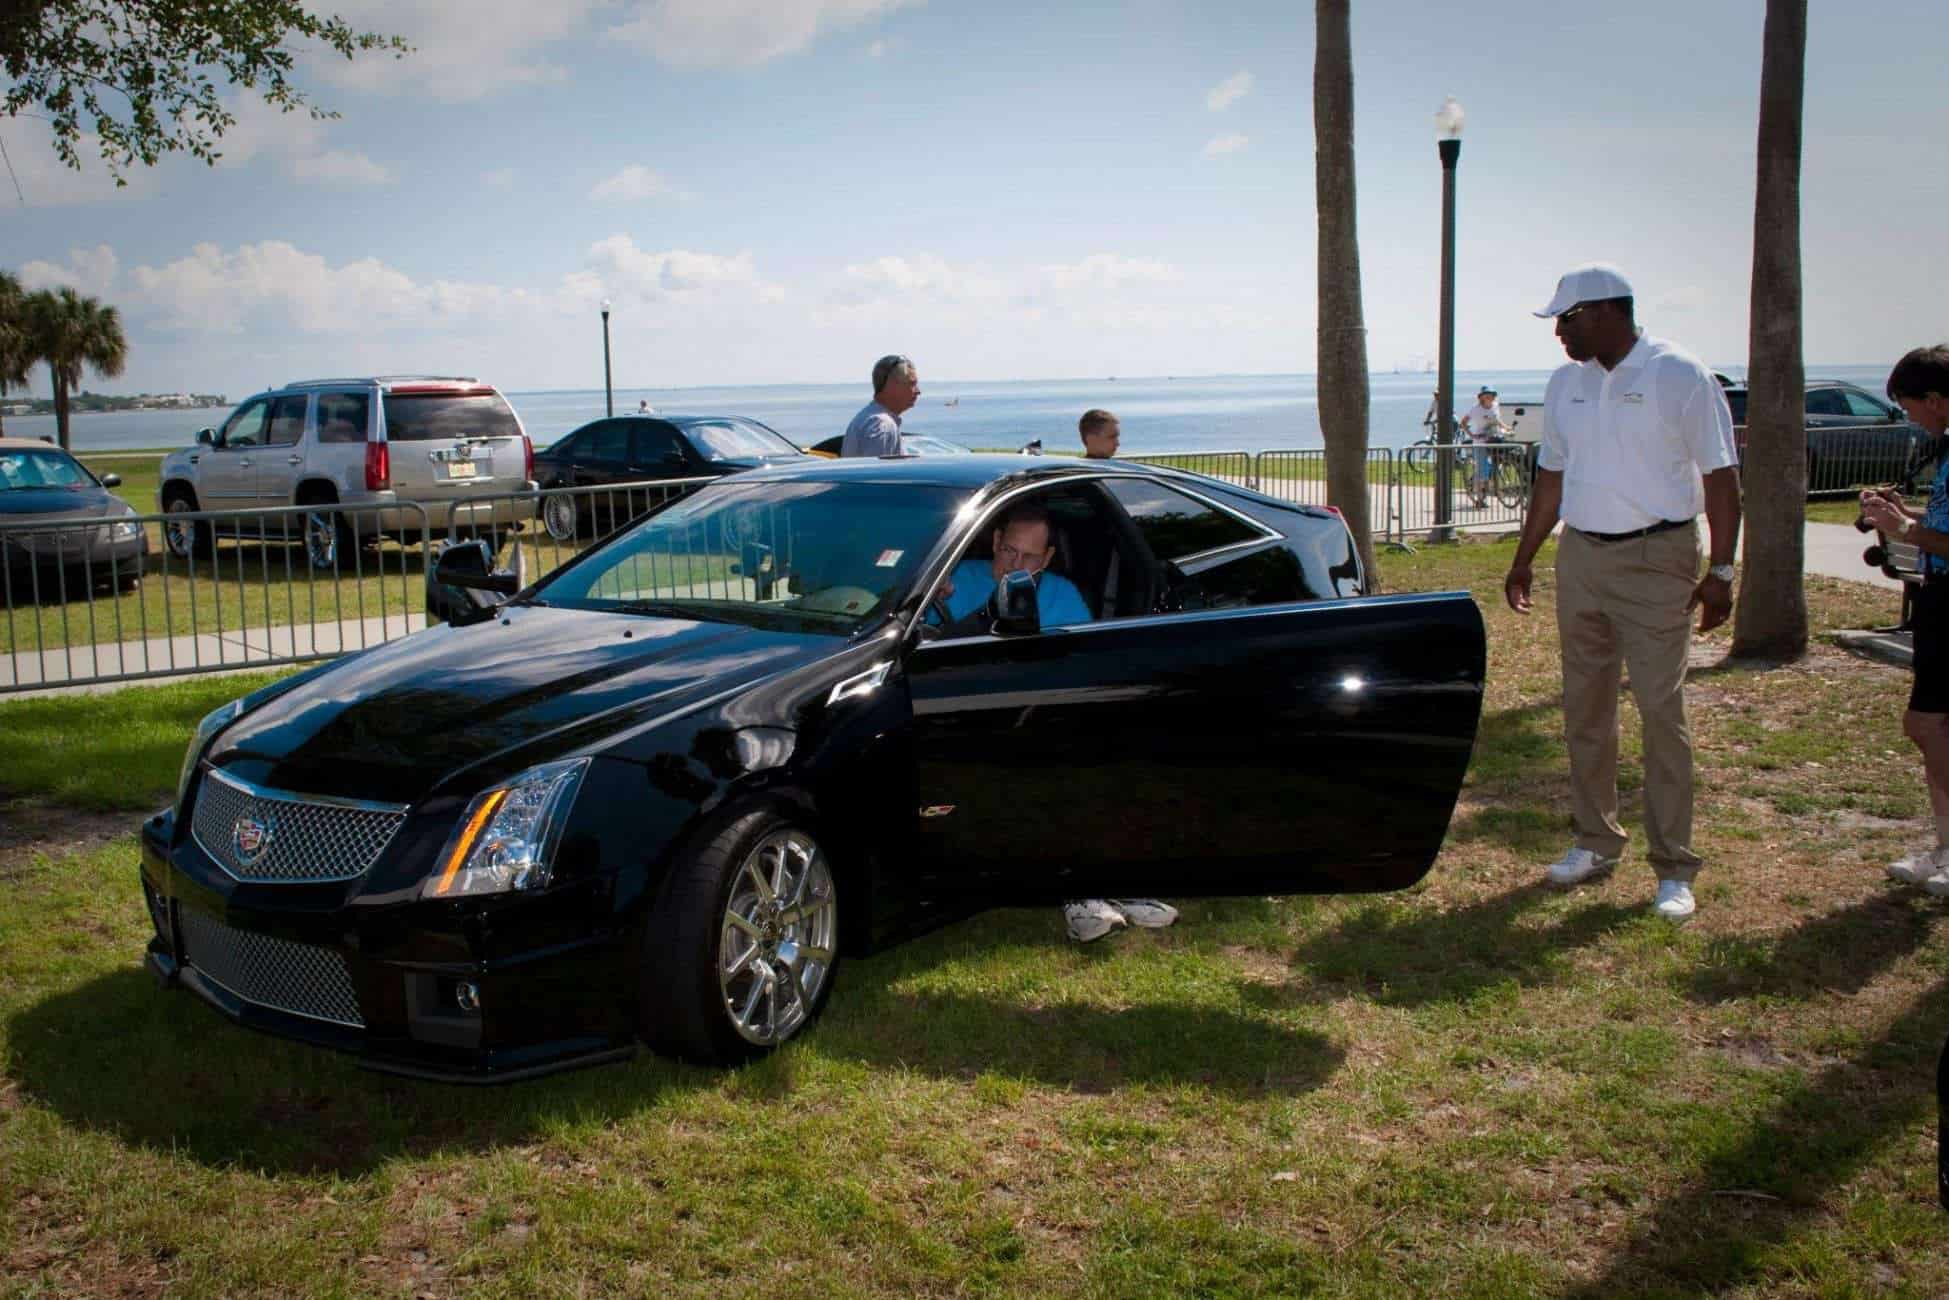 Dimmitt Cadillac - Sponsor of 8th Annual Safety Harbor Wine Festival